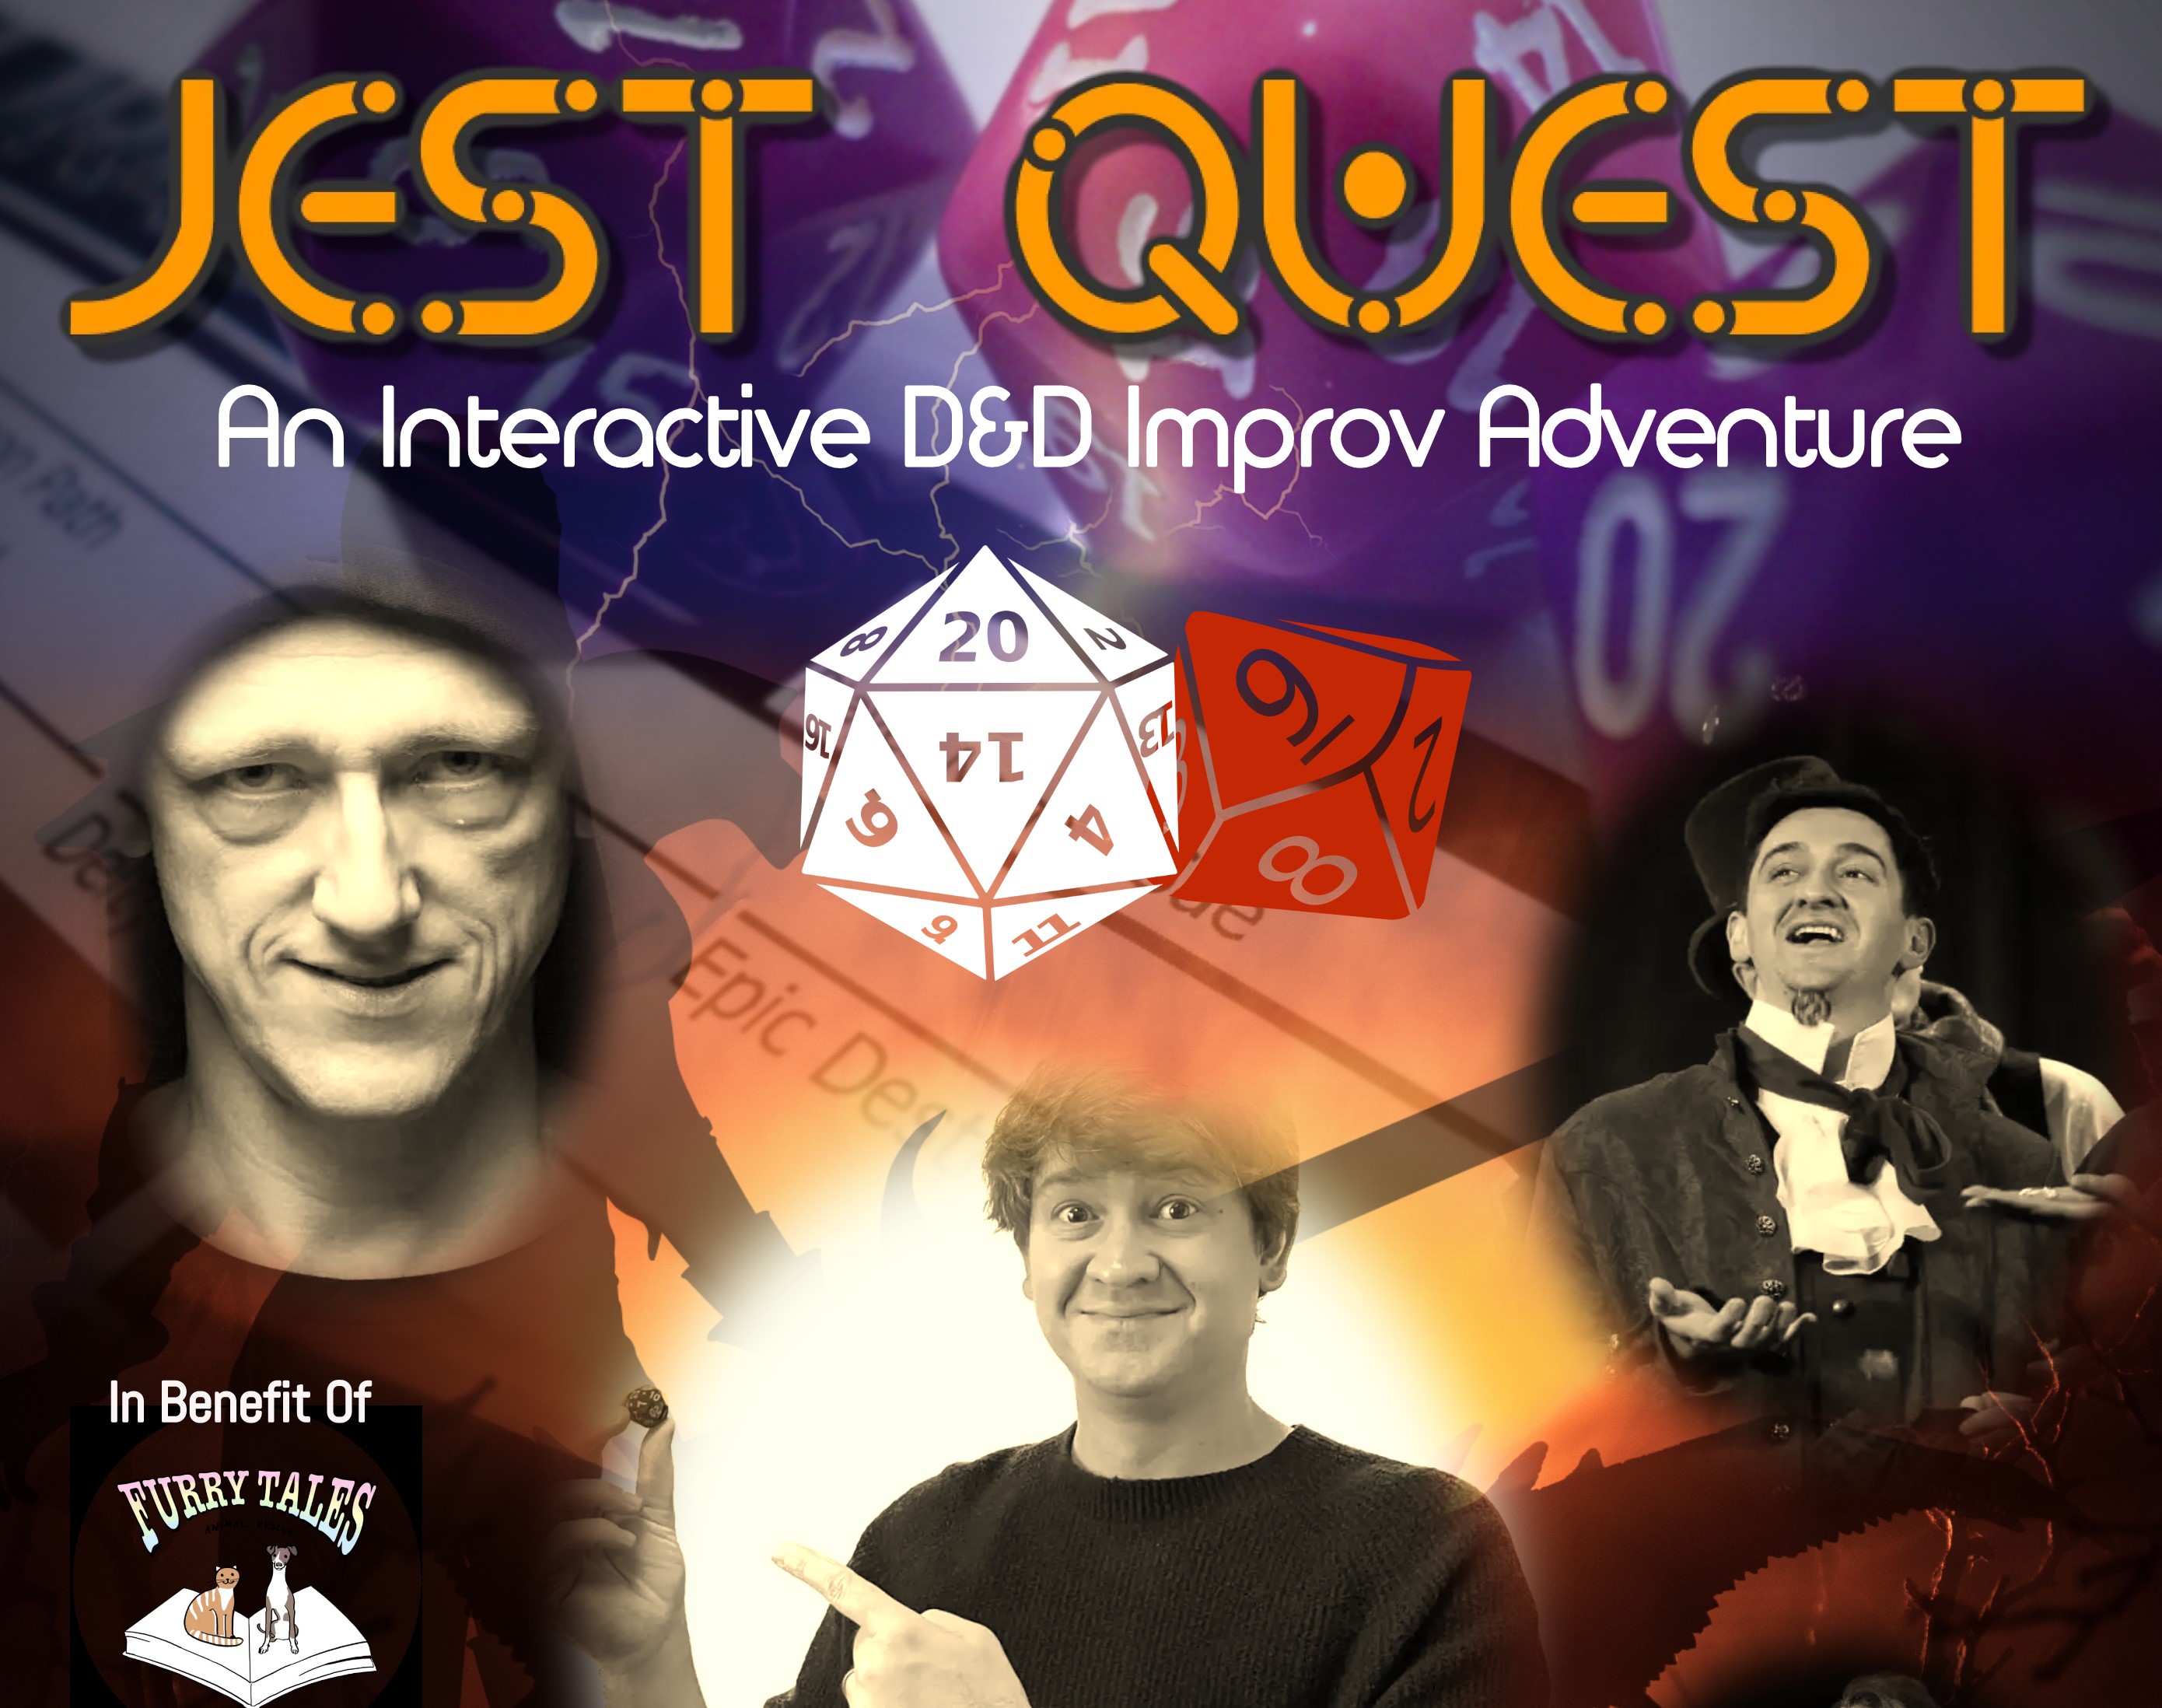 Jest Quest: Join This Interactive Comedy Adventure This Saturday (Jun 22)